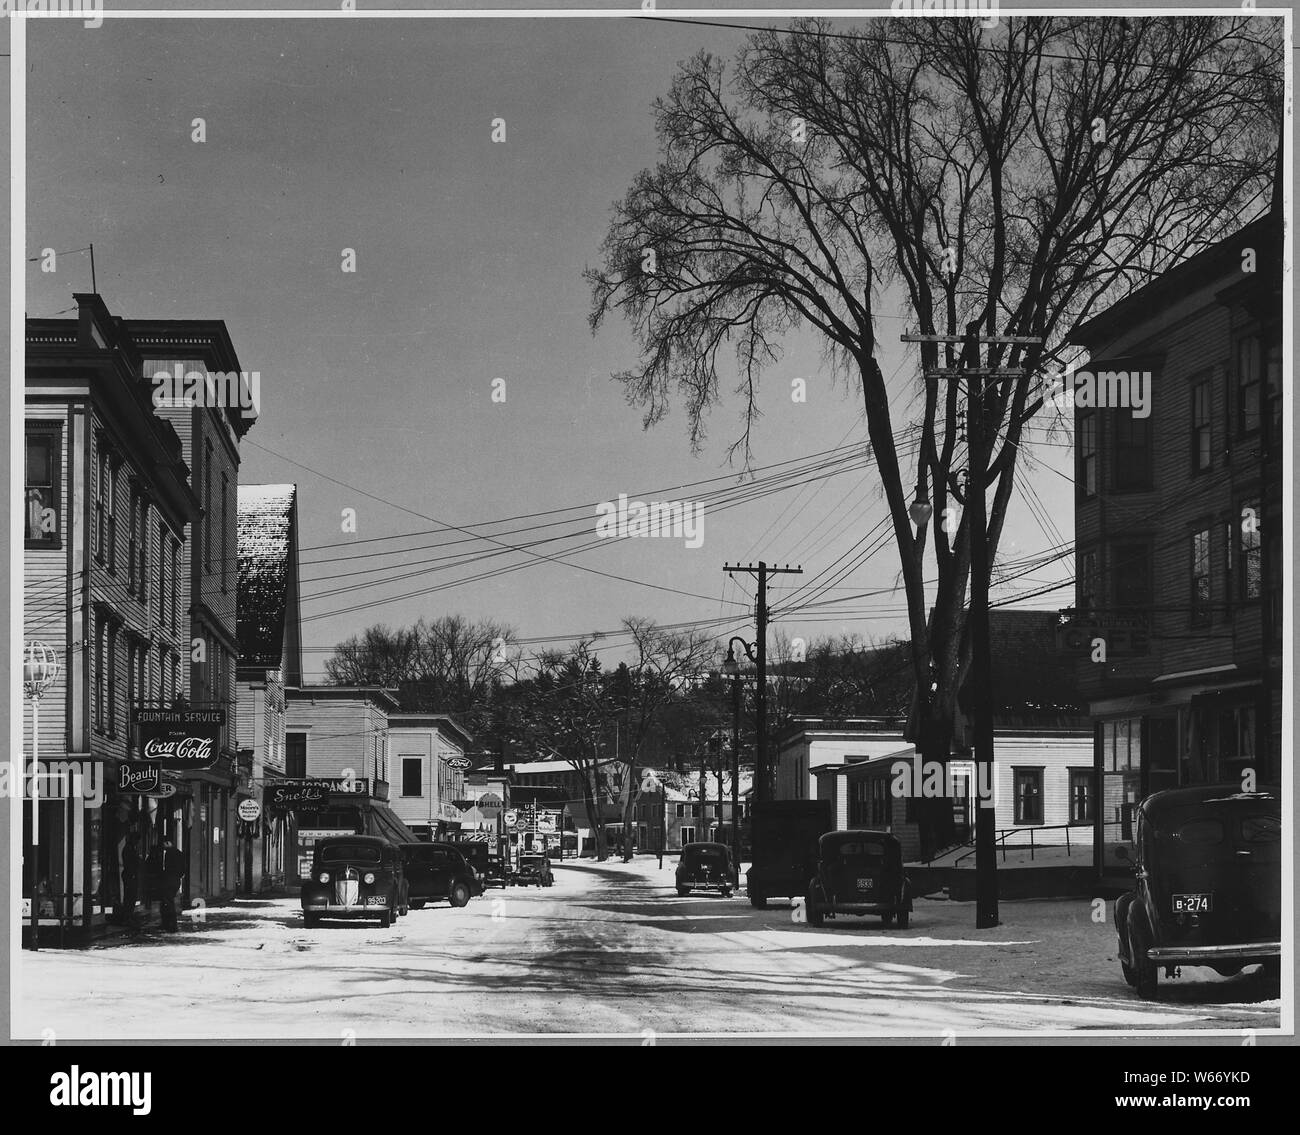 Landaff, Grafton County, New Hampshire. Though buying and selling is almost all done here in Lisbon . . .; Scope and content:  Full caption reads as follows: Landaff, Grafton County, New Hampshire. Though buying and selling is almost all done here in Lisbon village, Landaff people do not consider themselves as belonging in any way to this community. Shown here is most of the main street. The village boasts several churches, stores and the offices of quite a few professionals. The population of Lisbon is over 2,000. Stock Photo